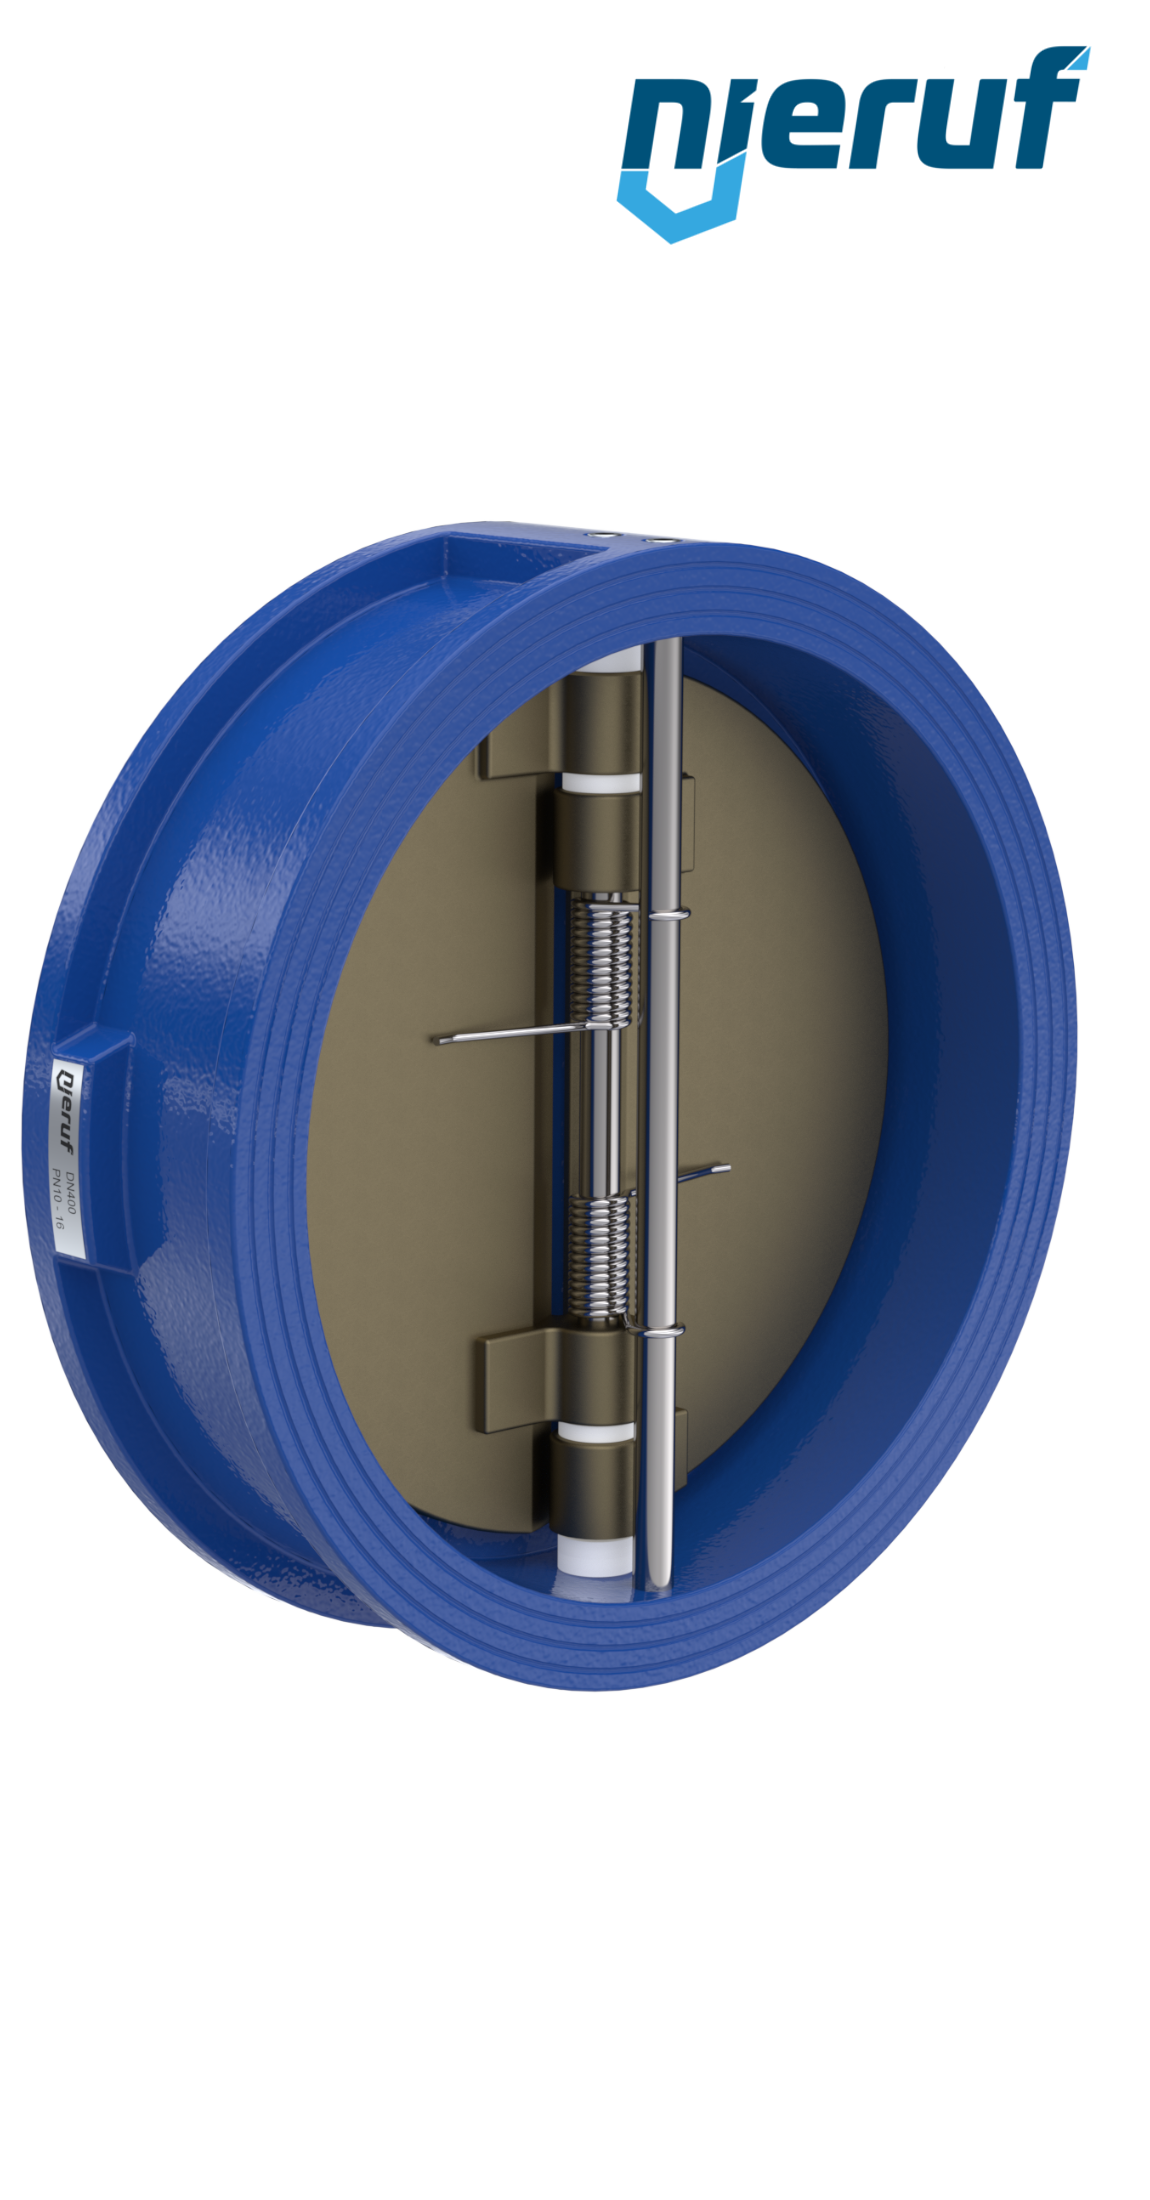 dual plate check valve DN400 DR04 GGG40 epoxyd plated blue 180µm EPDM